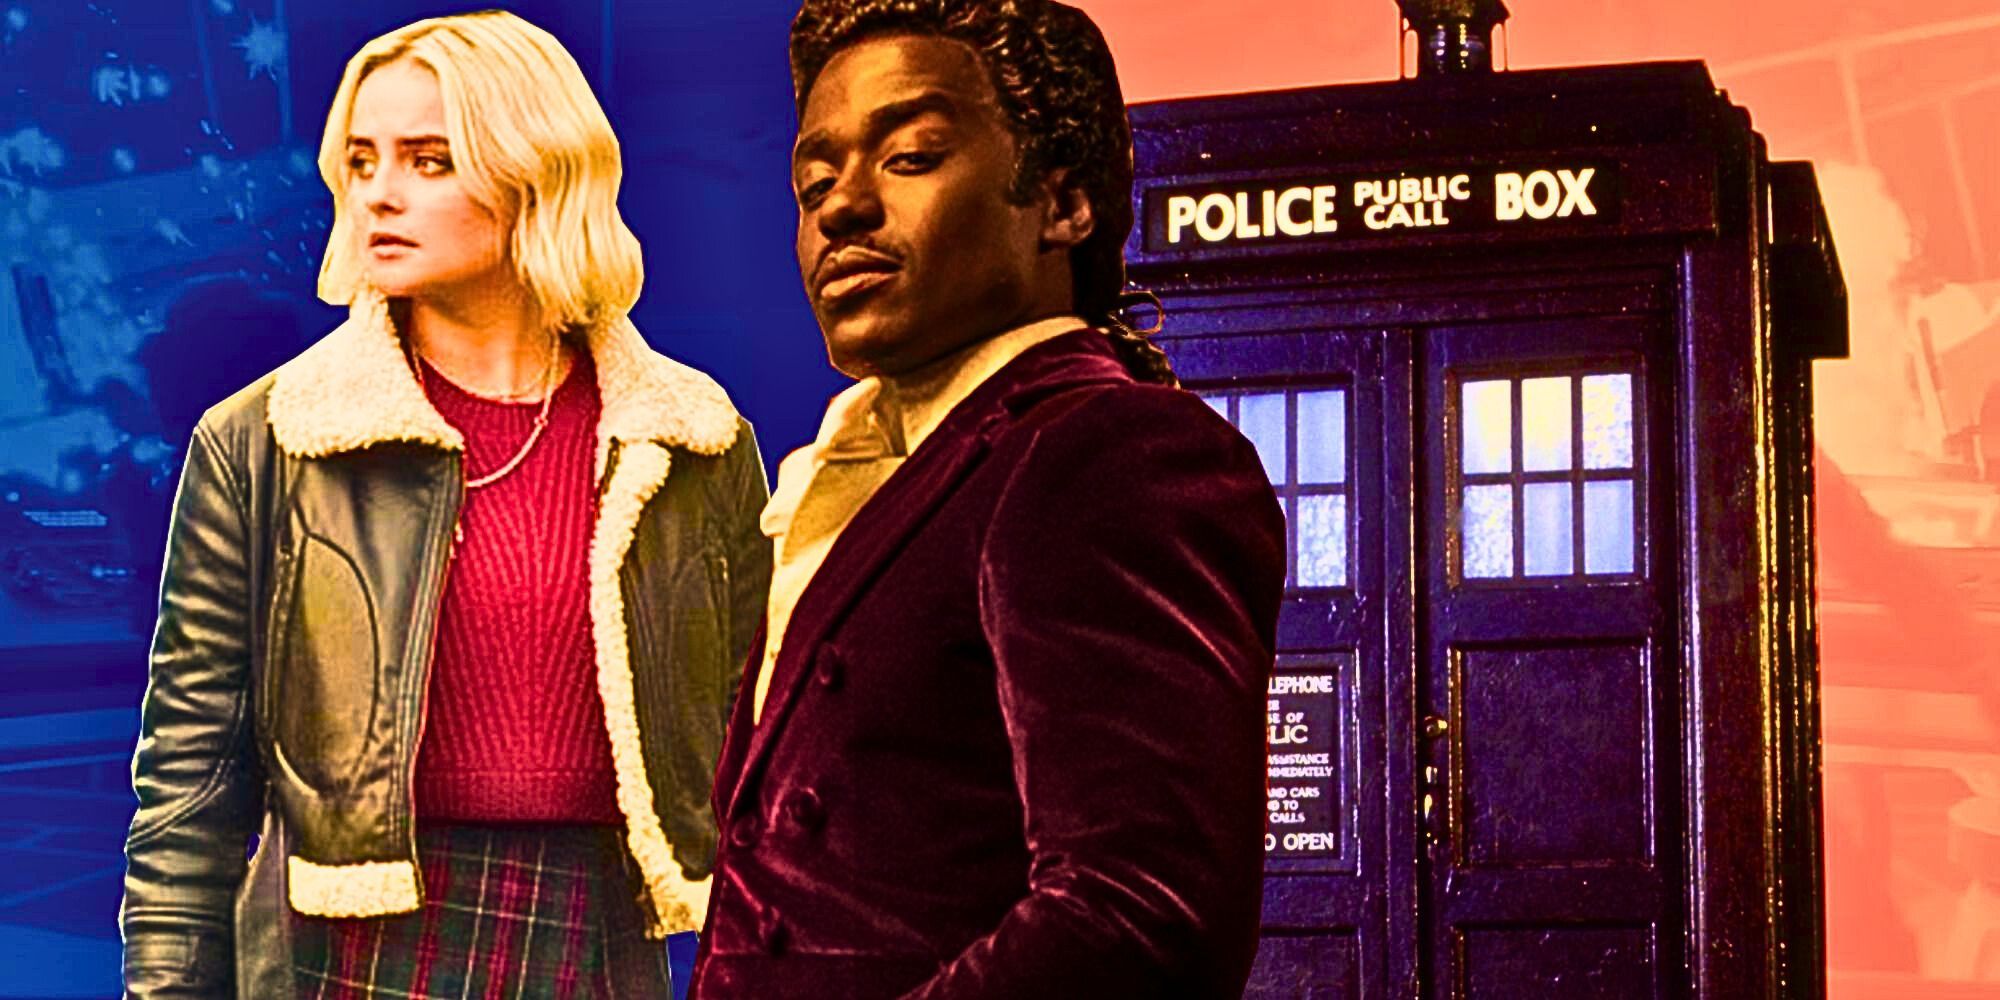 A custom image of Millie Gibson as Ruby Sunday and Ncuti Gatwa's Fifteenth Doctor against a backdrop of Doctor Who imagery